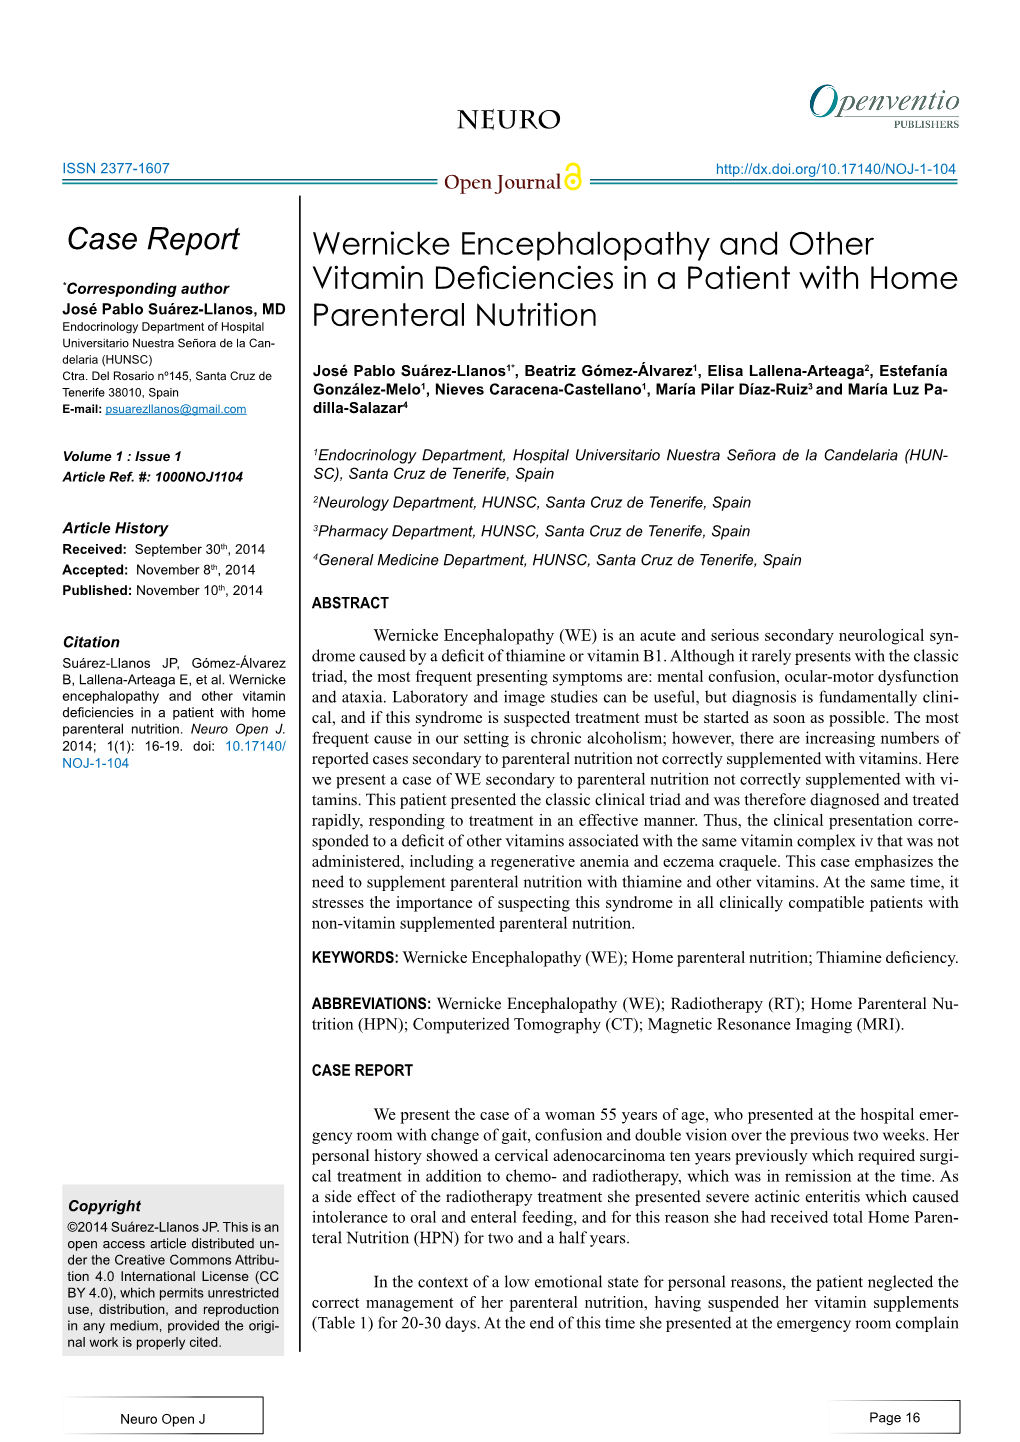 Wernicke Encephalopathy and Other Vitamin Deficiencies in a Patient with Home Parenteral Nutrition Case Report